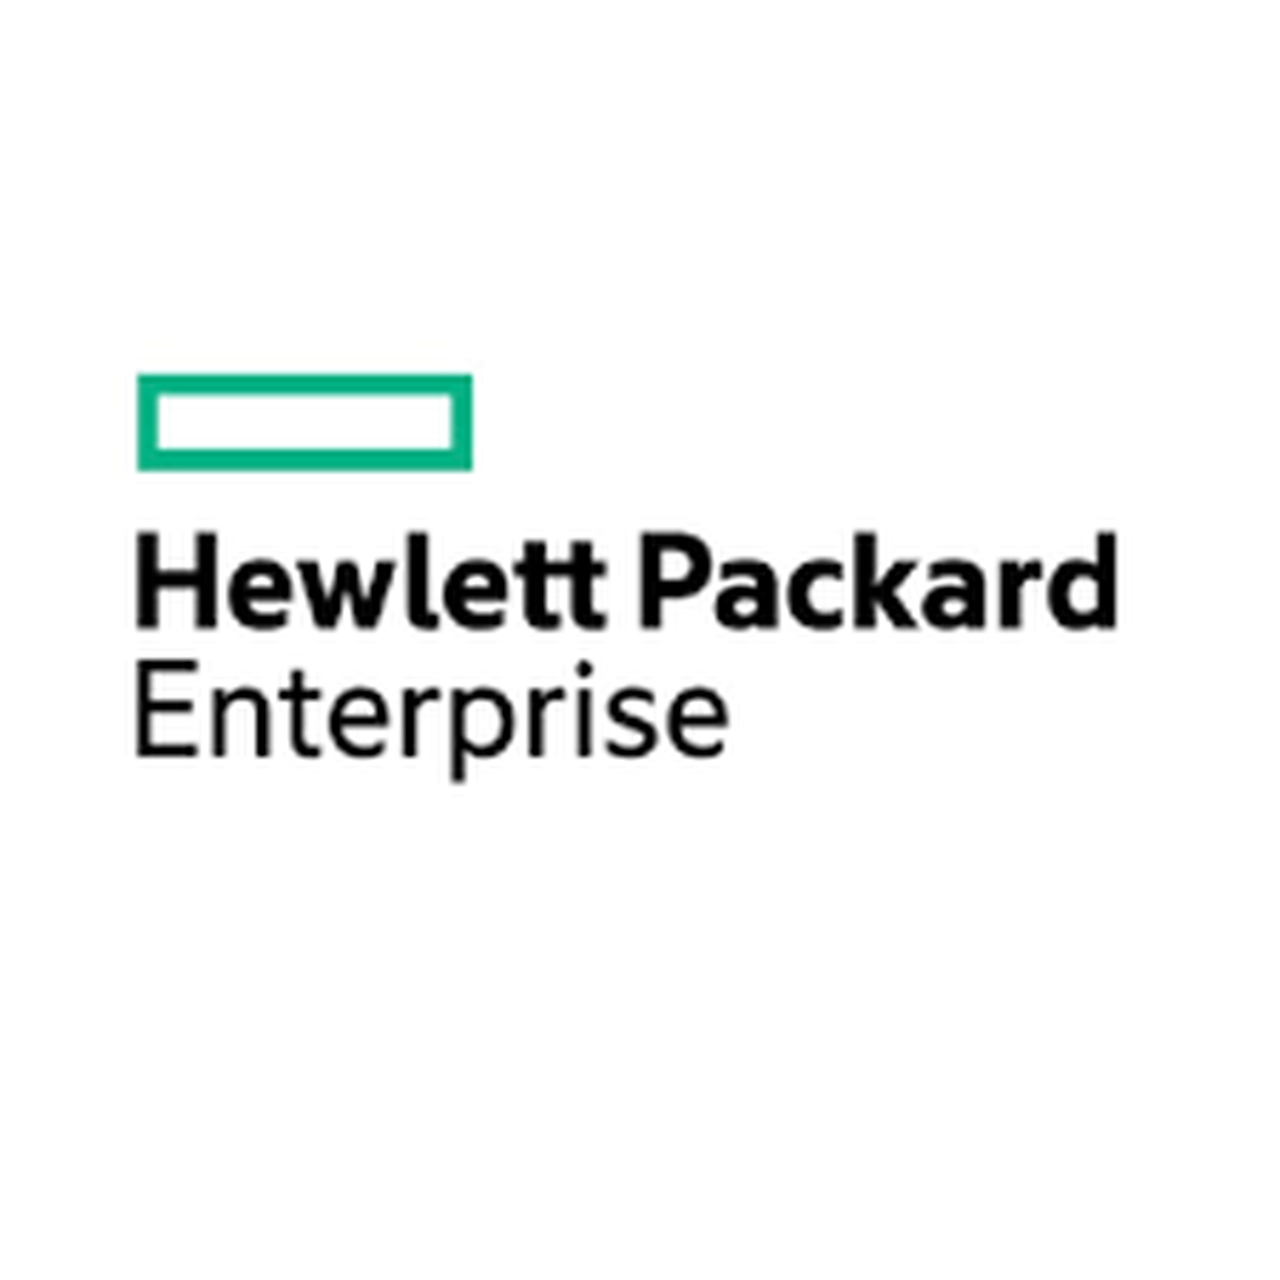 HPE SY480 Gen10 Plus CPU Rear HS Kit Factory integrated